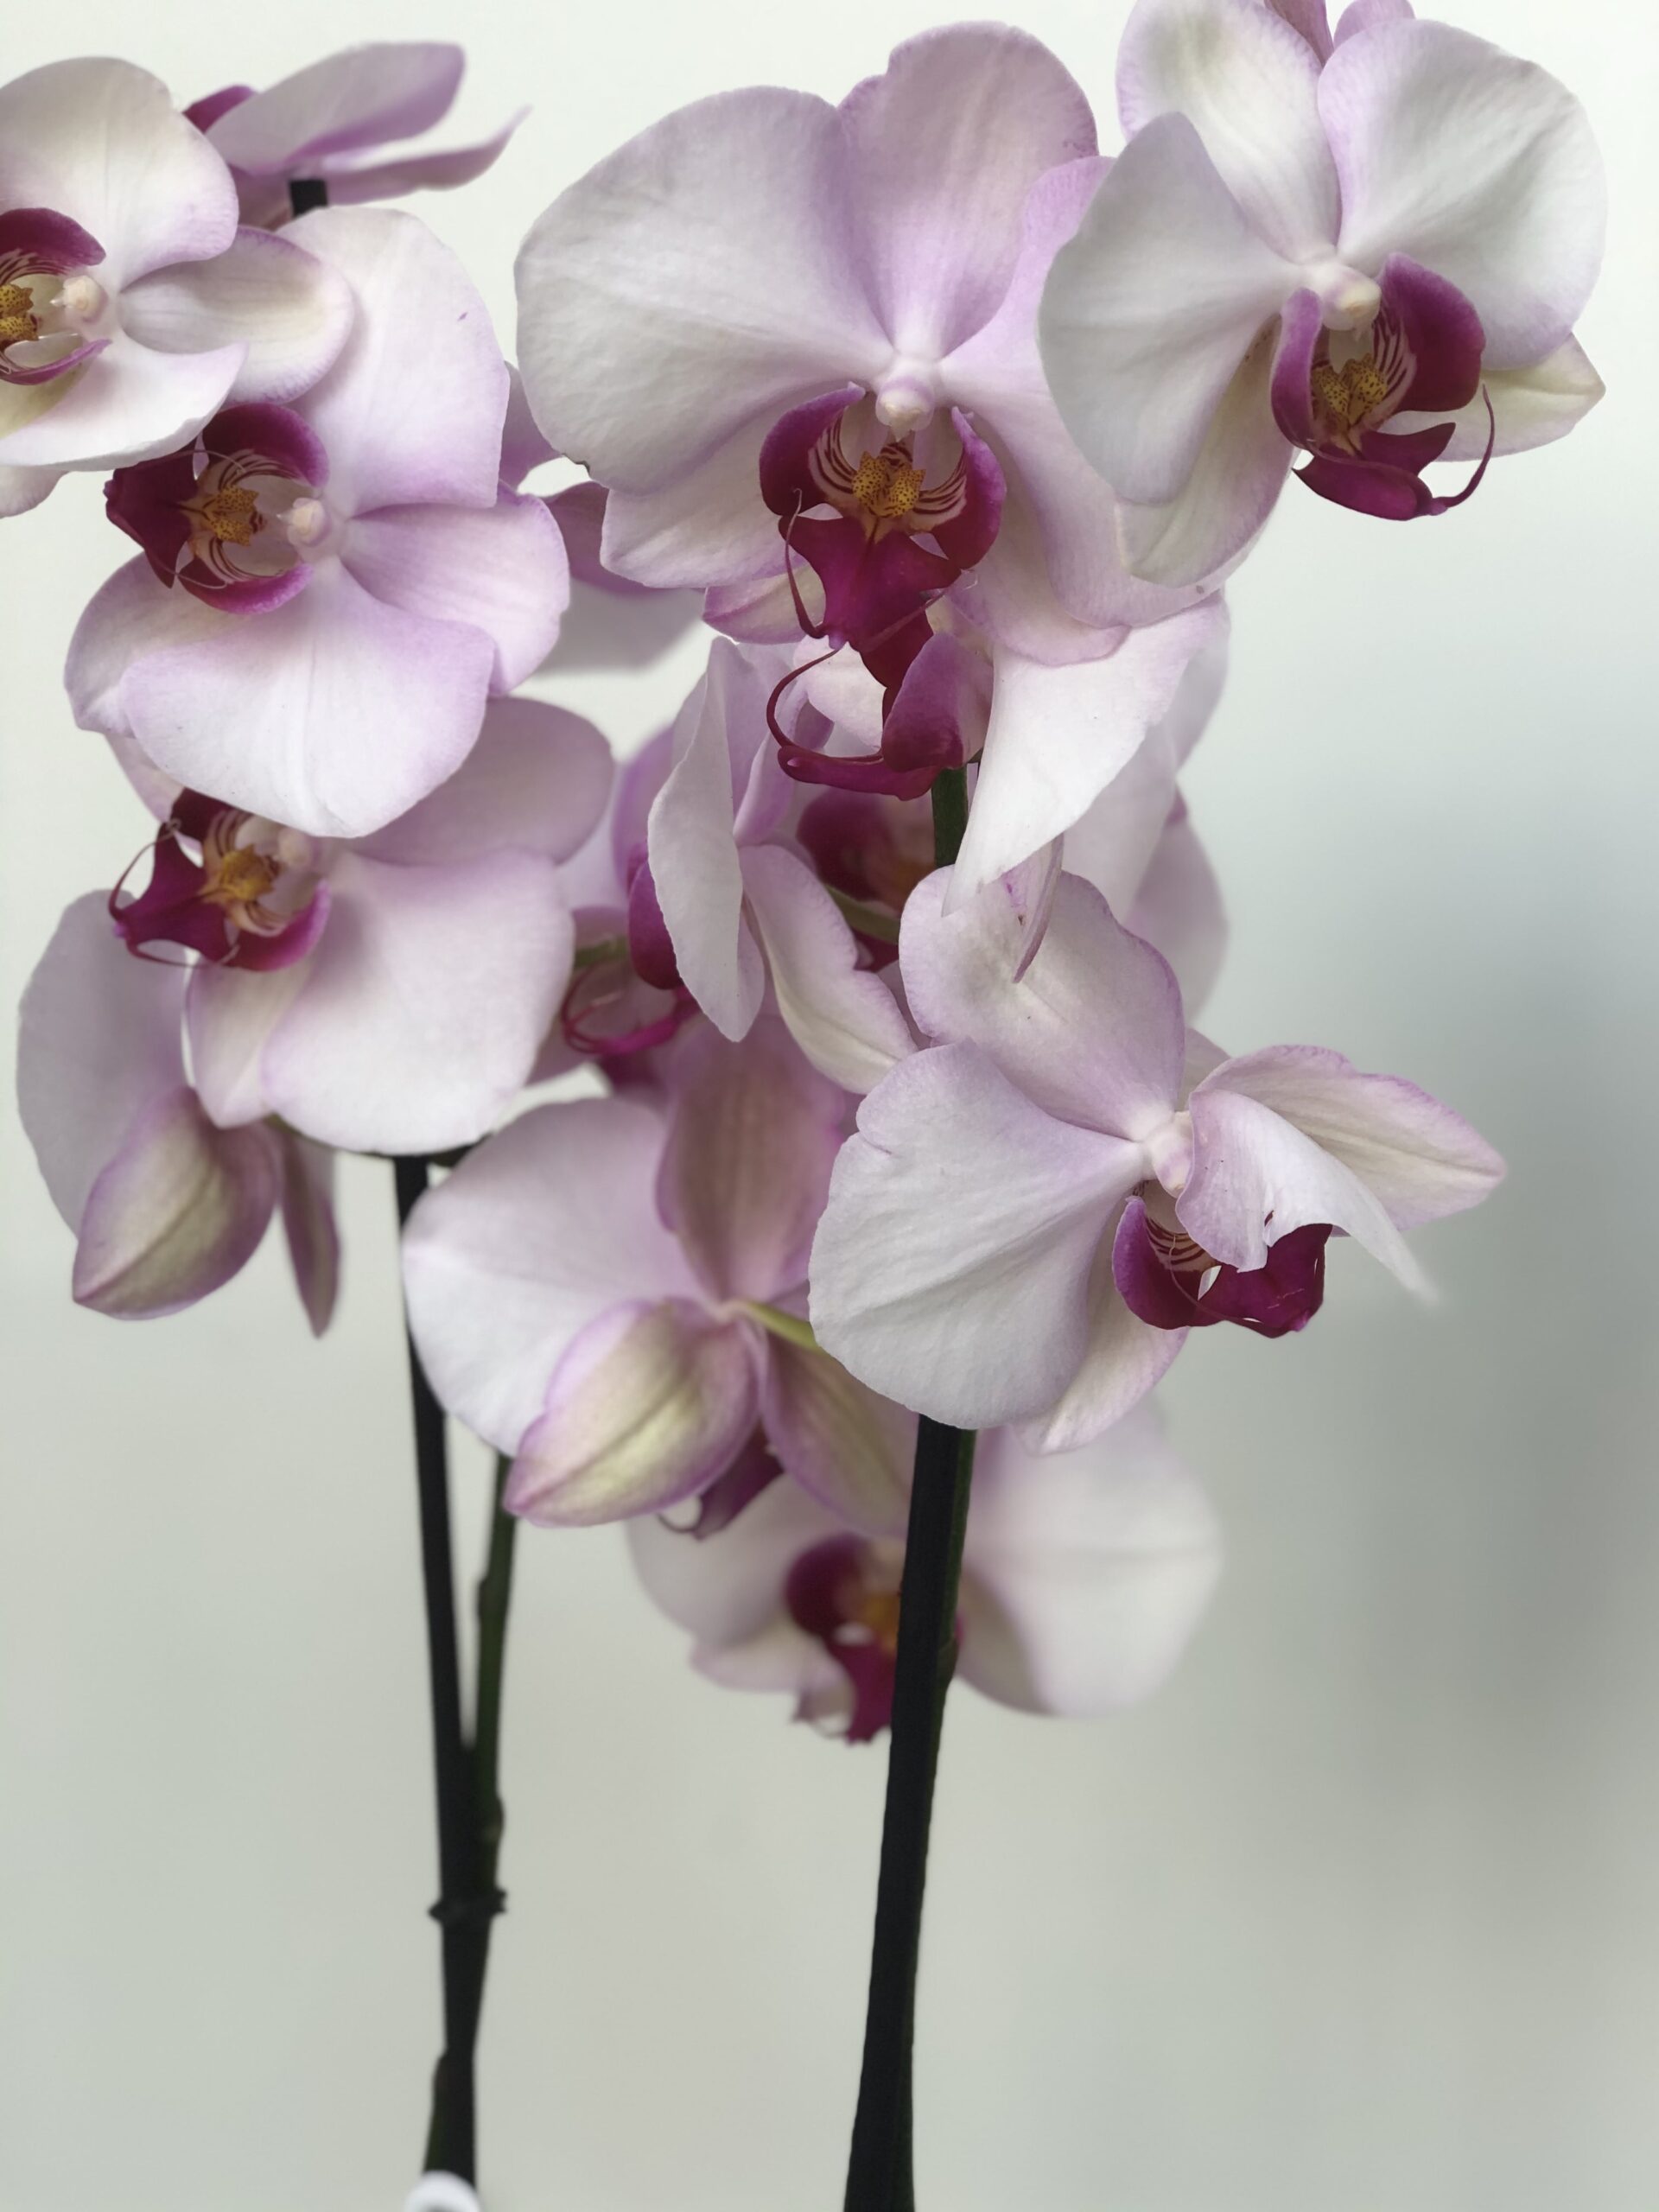 All-About-Orchids-by-Mathioudakis-scaled-1.jpg